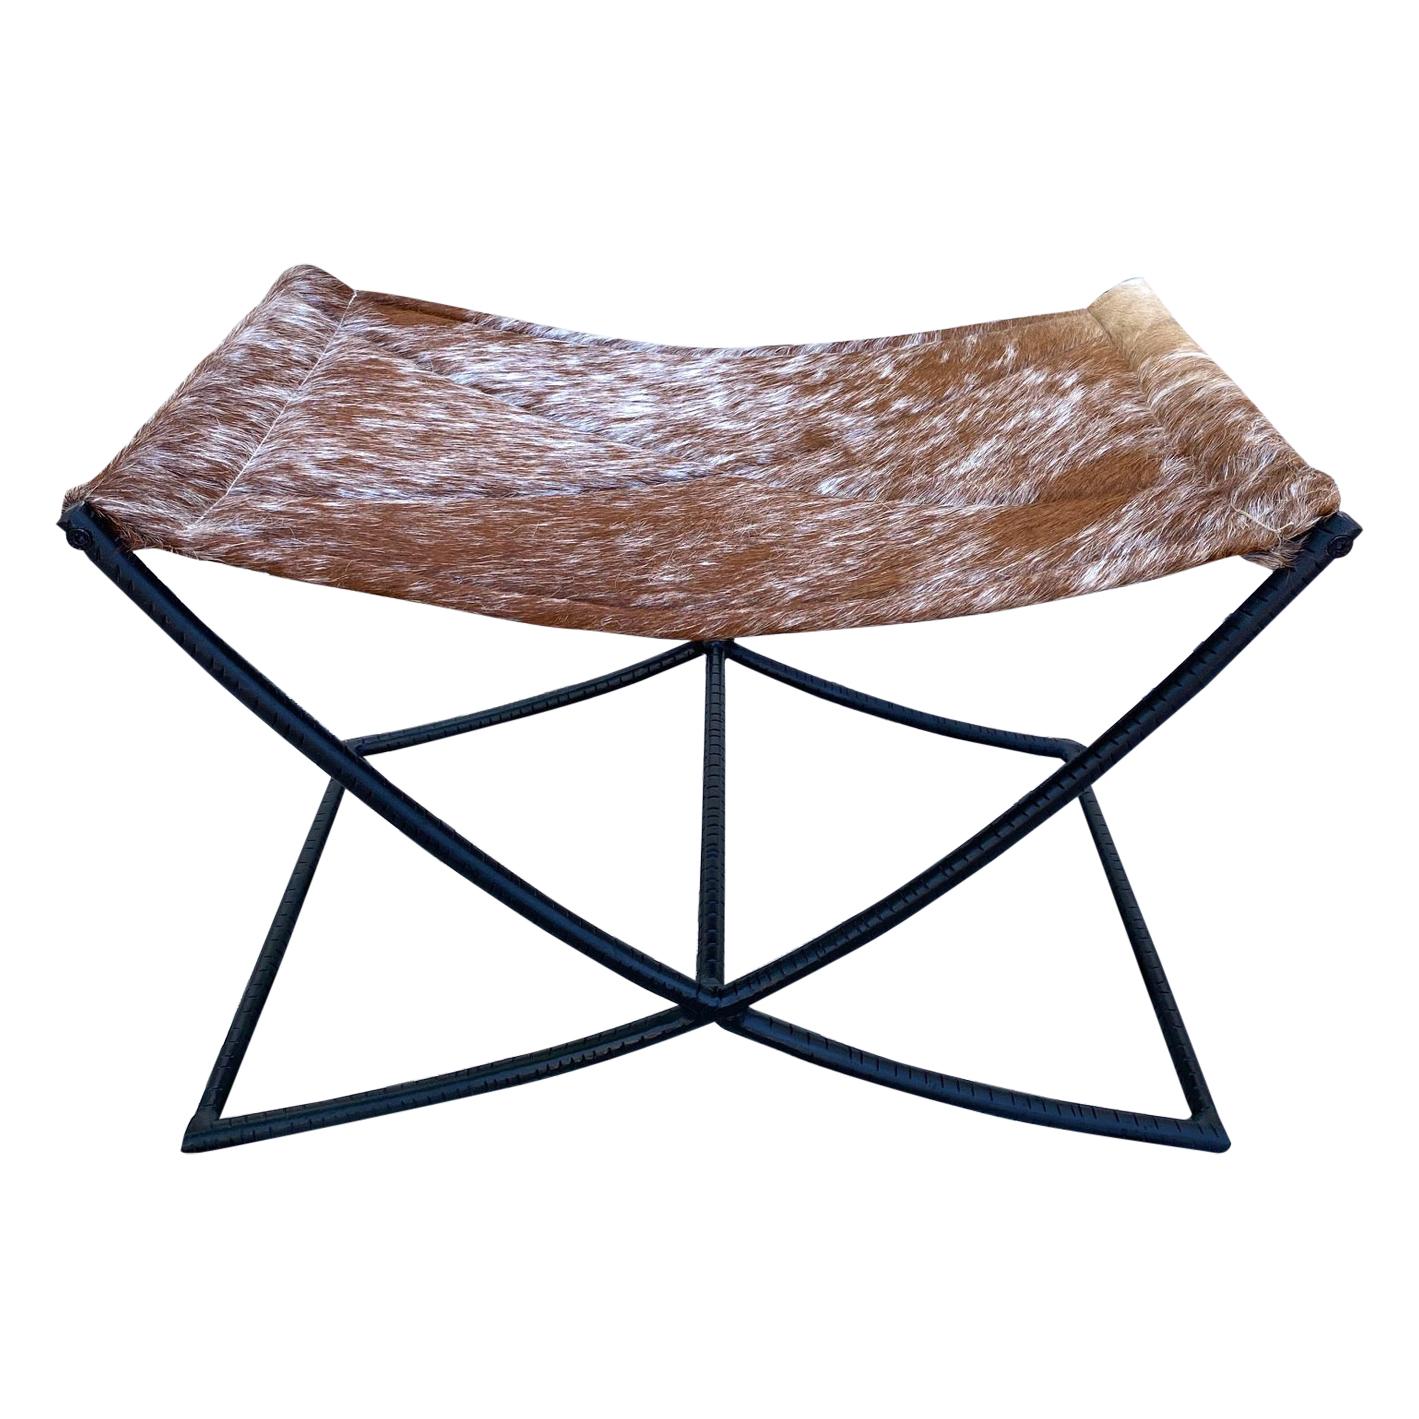 Campaign Style Stool with Brown and White Cowhide Seat and Black Iron Base